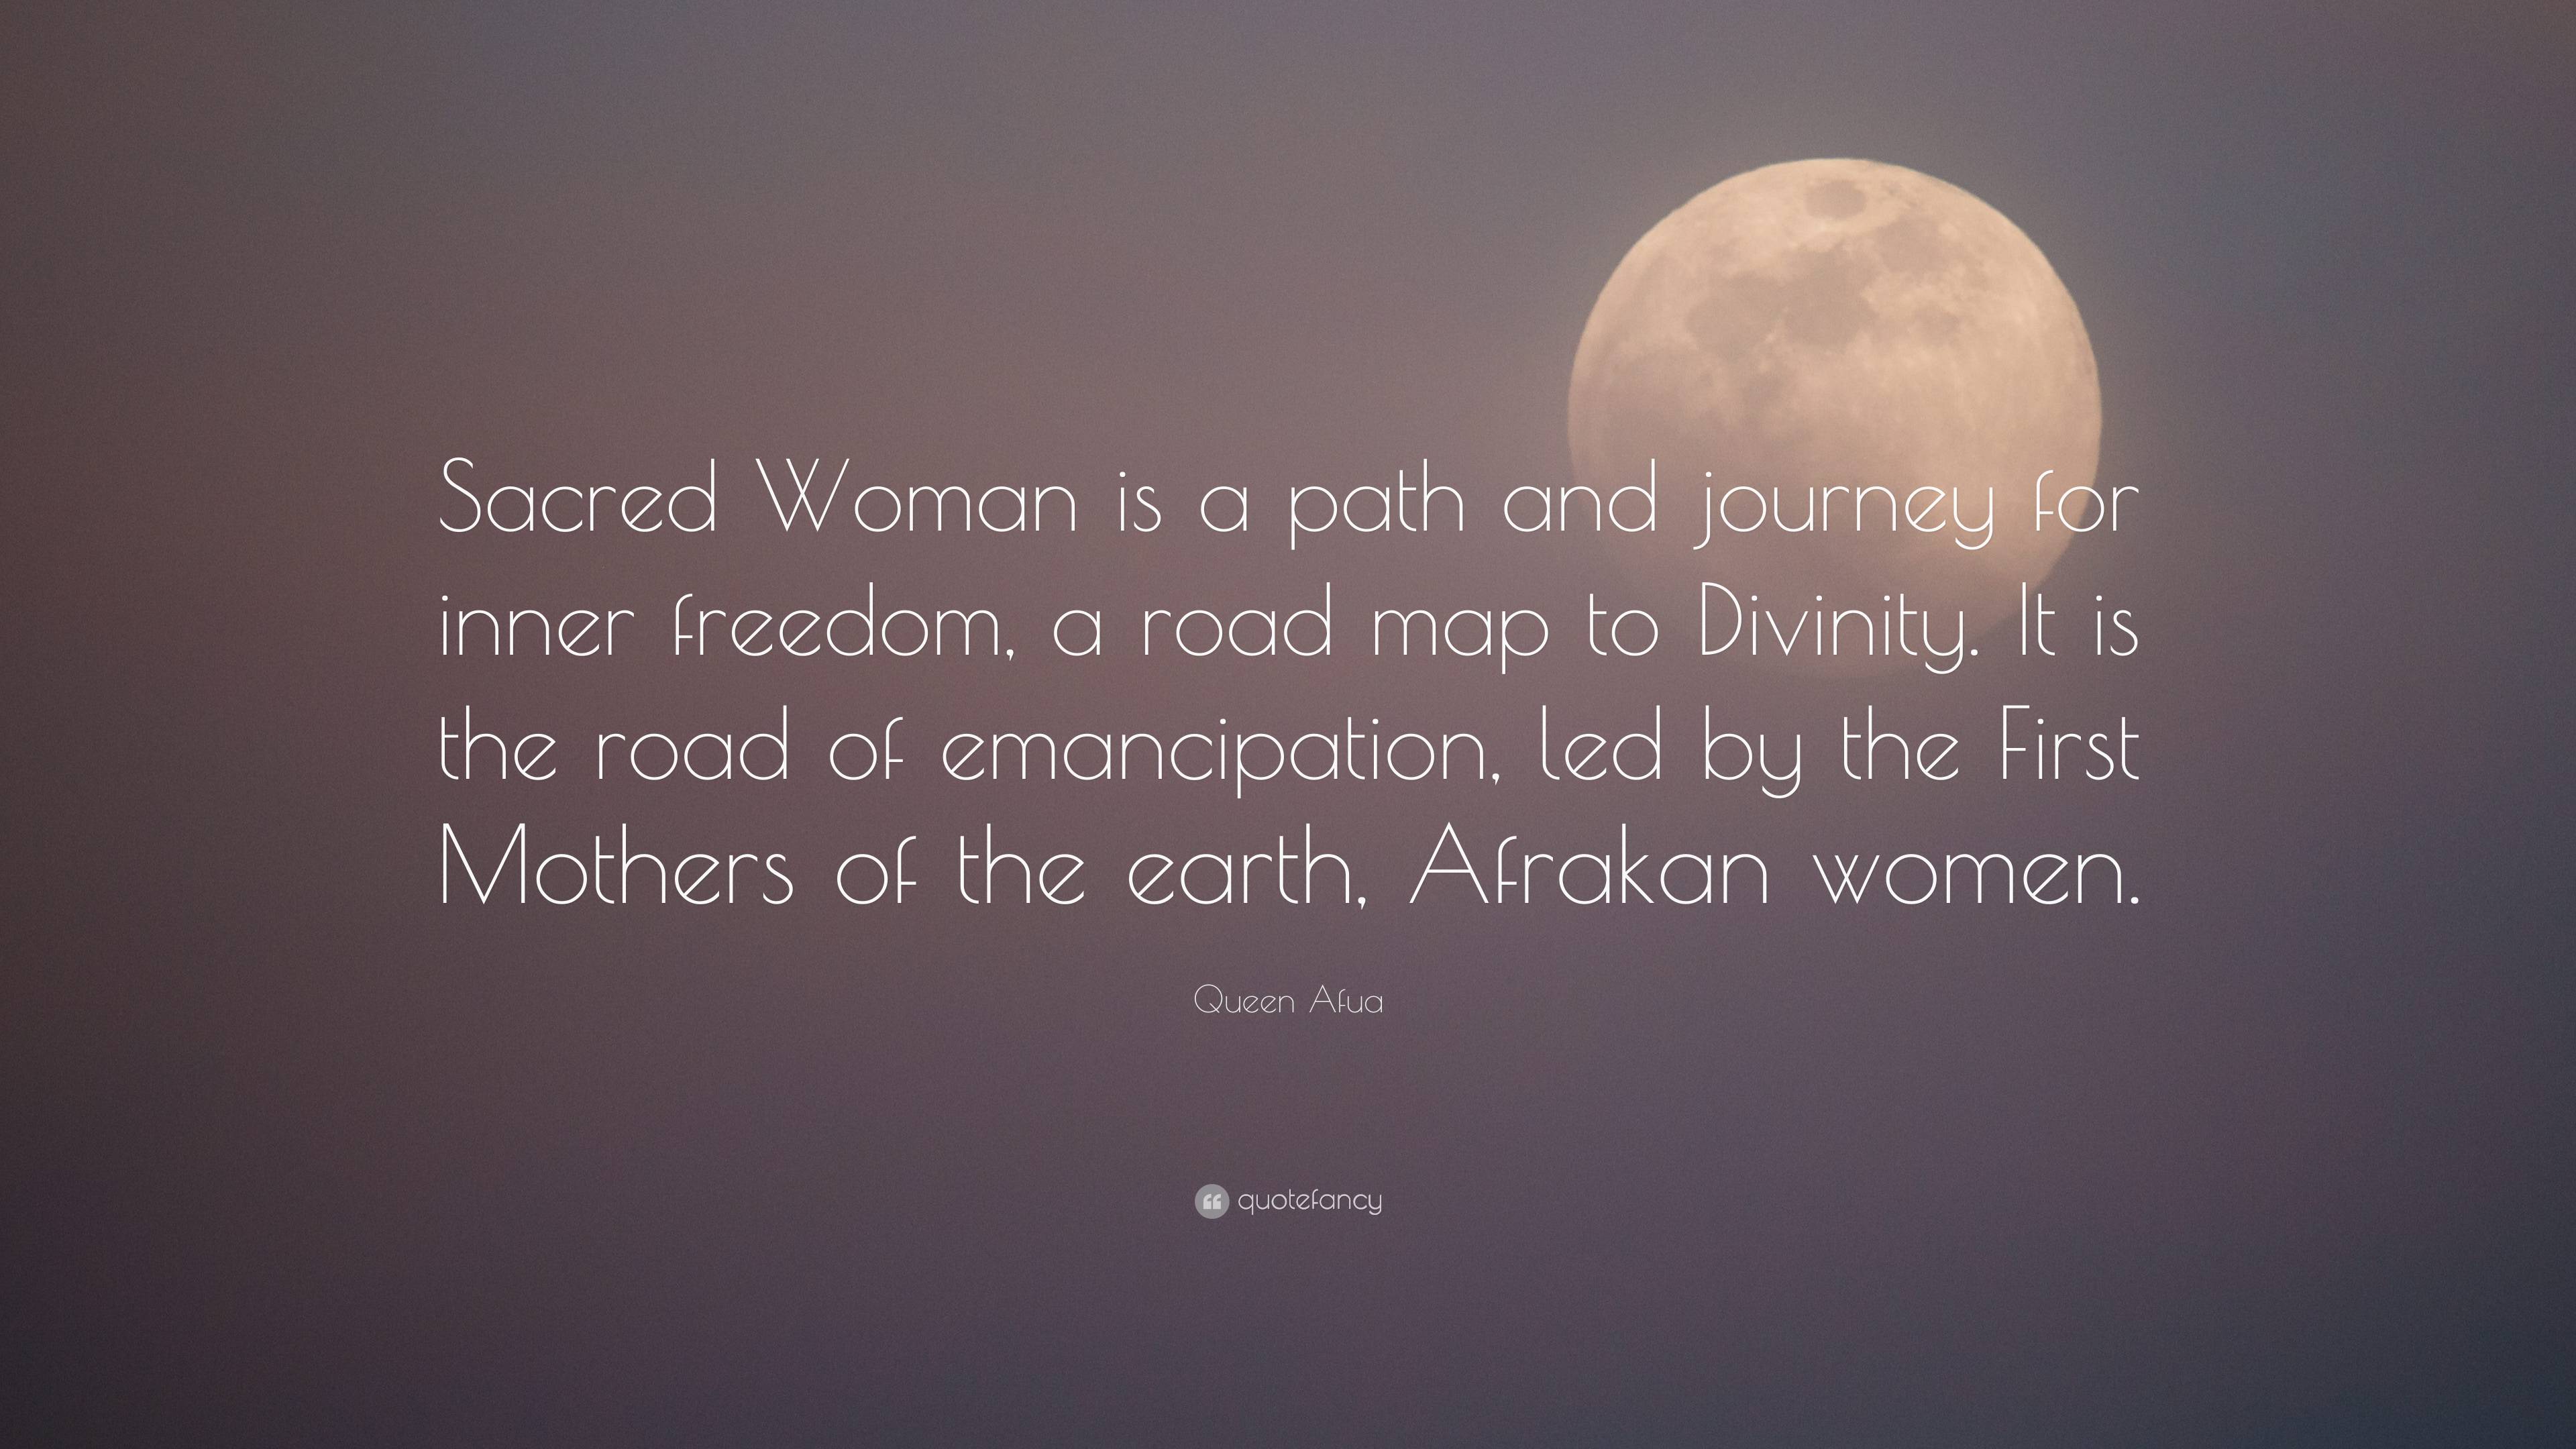 Queen Afua Quote: “Sacred Woman is a path and journey for inner